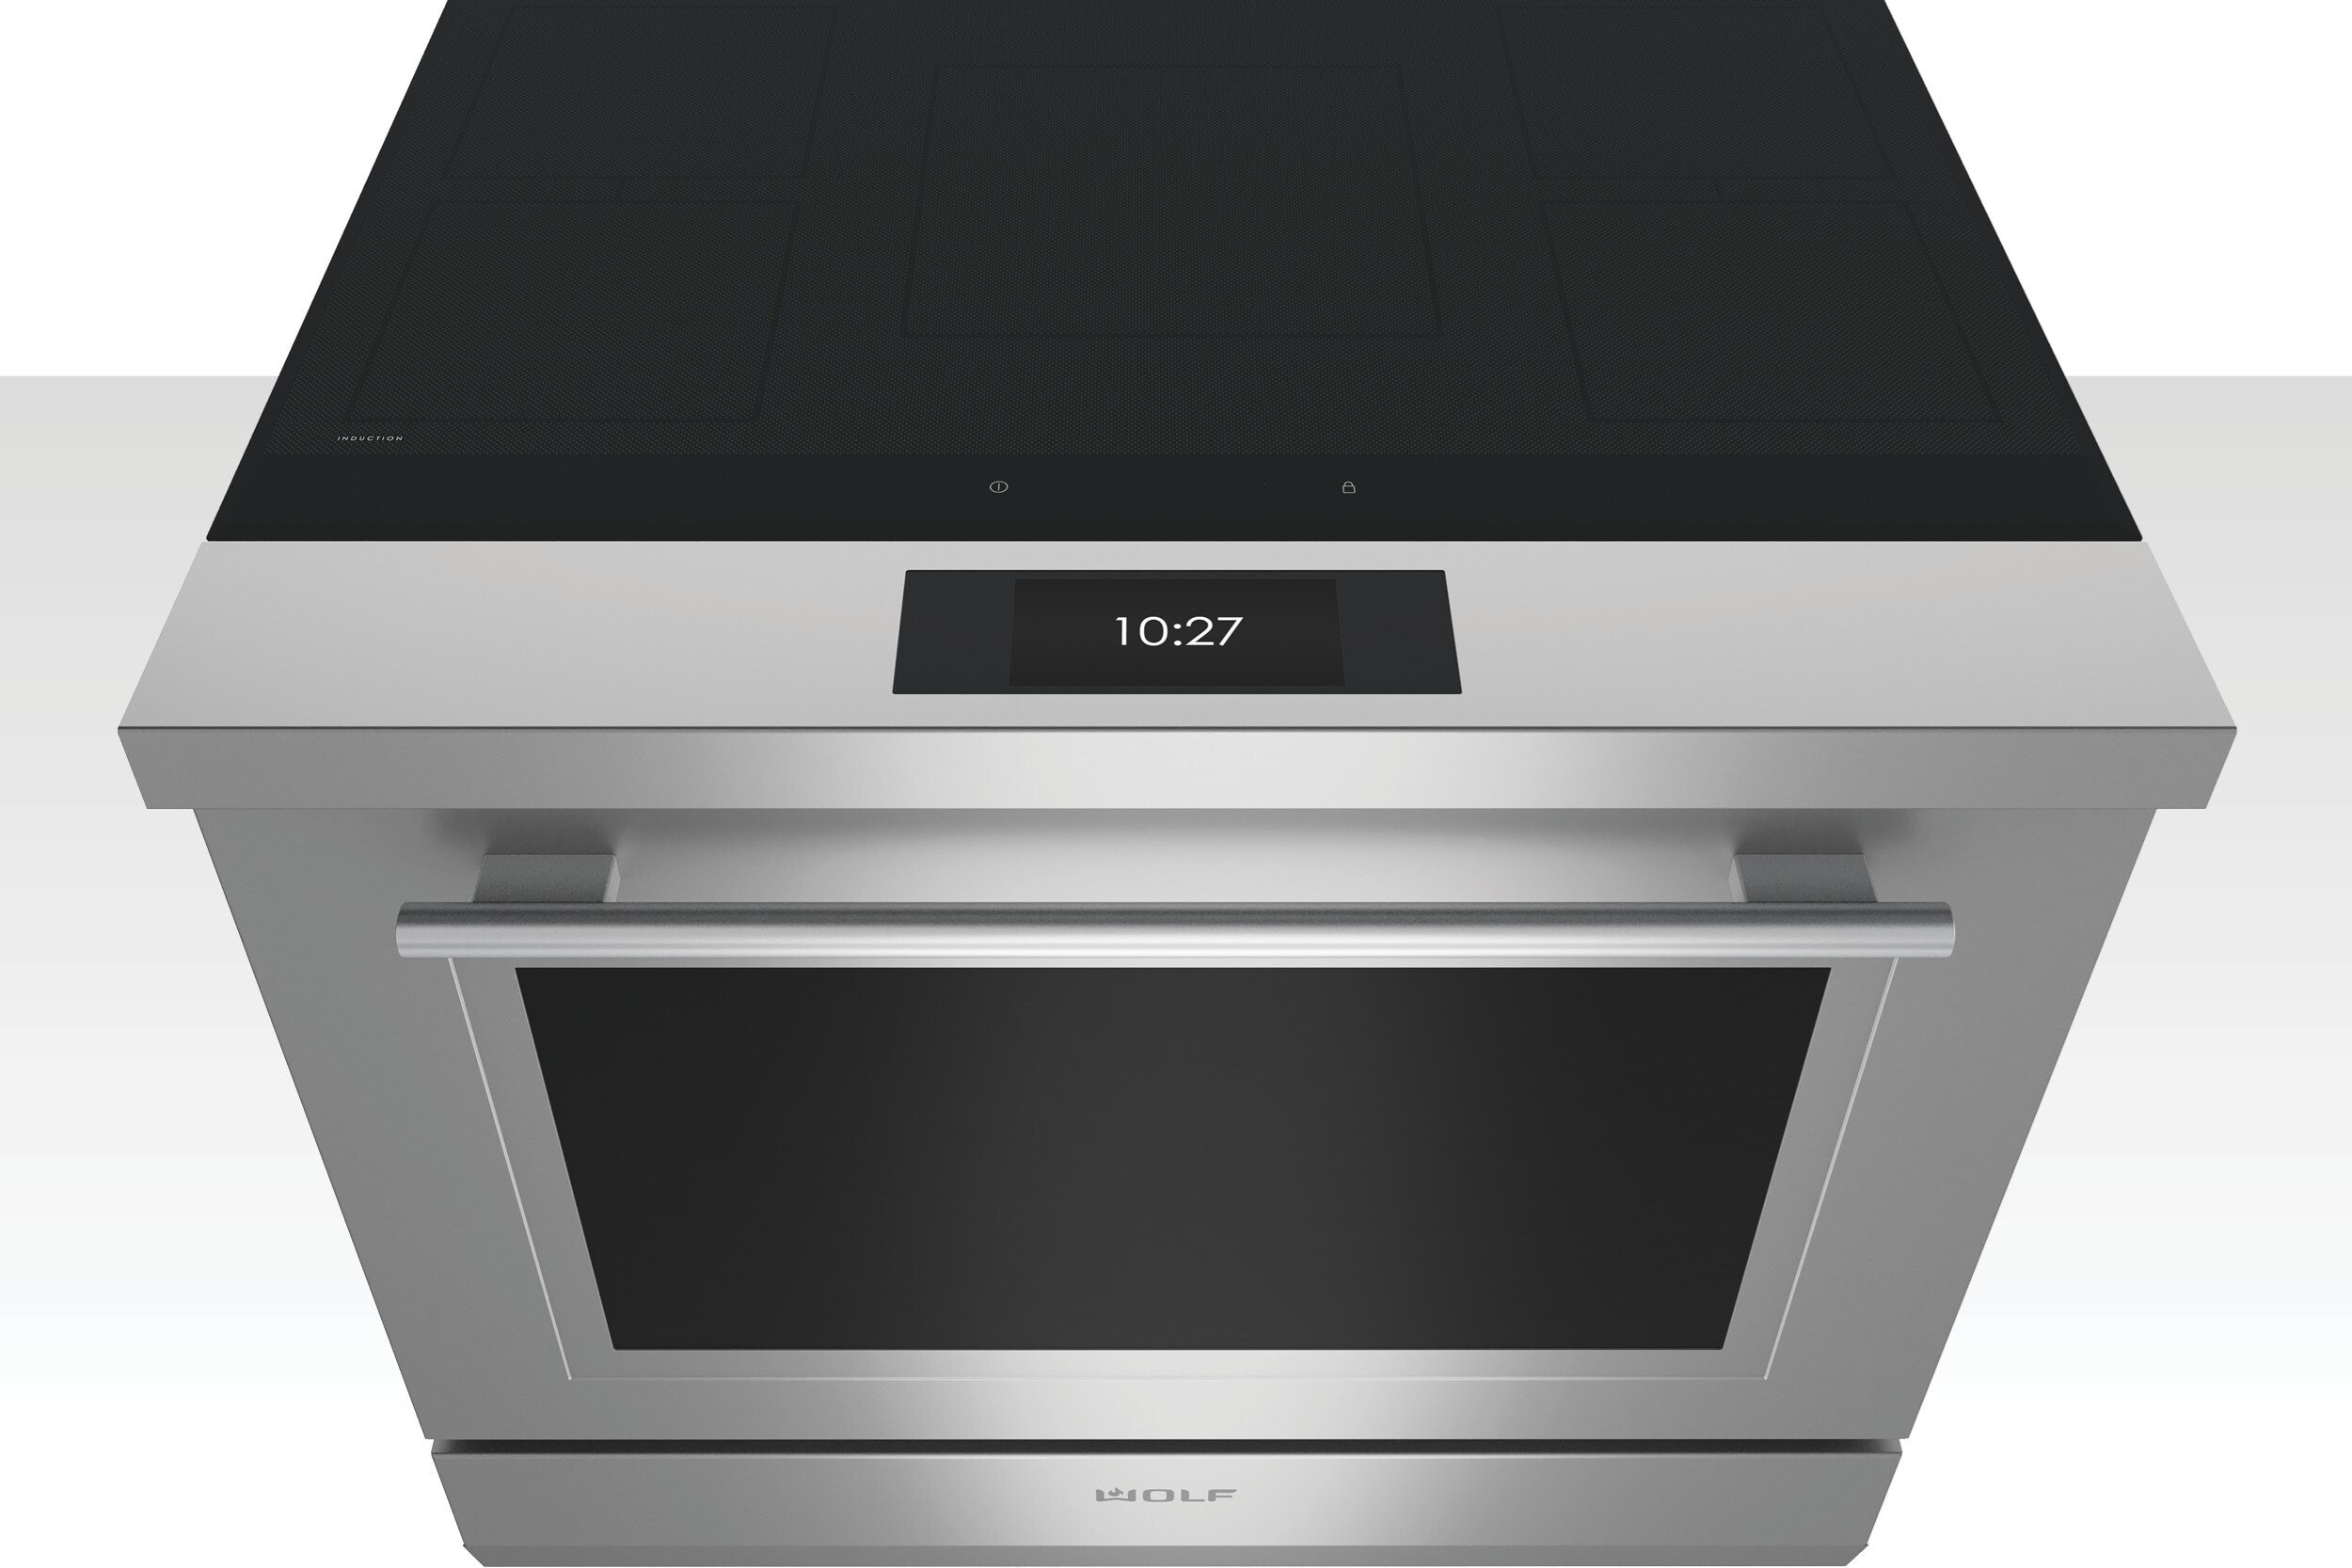 Wolf Induction Range featuring sleek cooktop and crystal clear digital display.